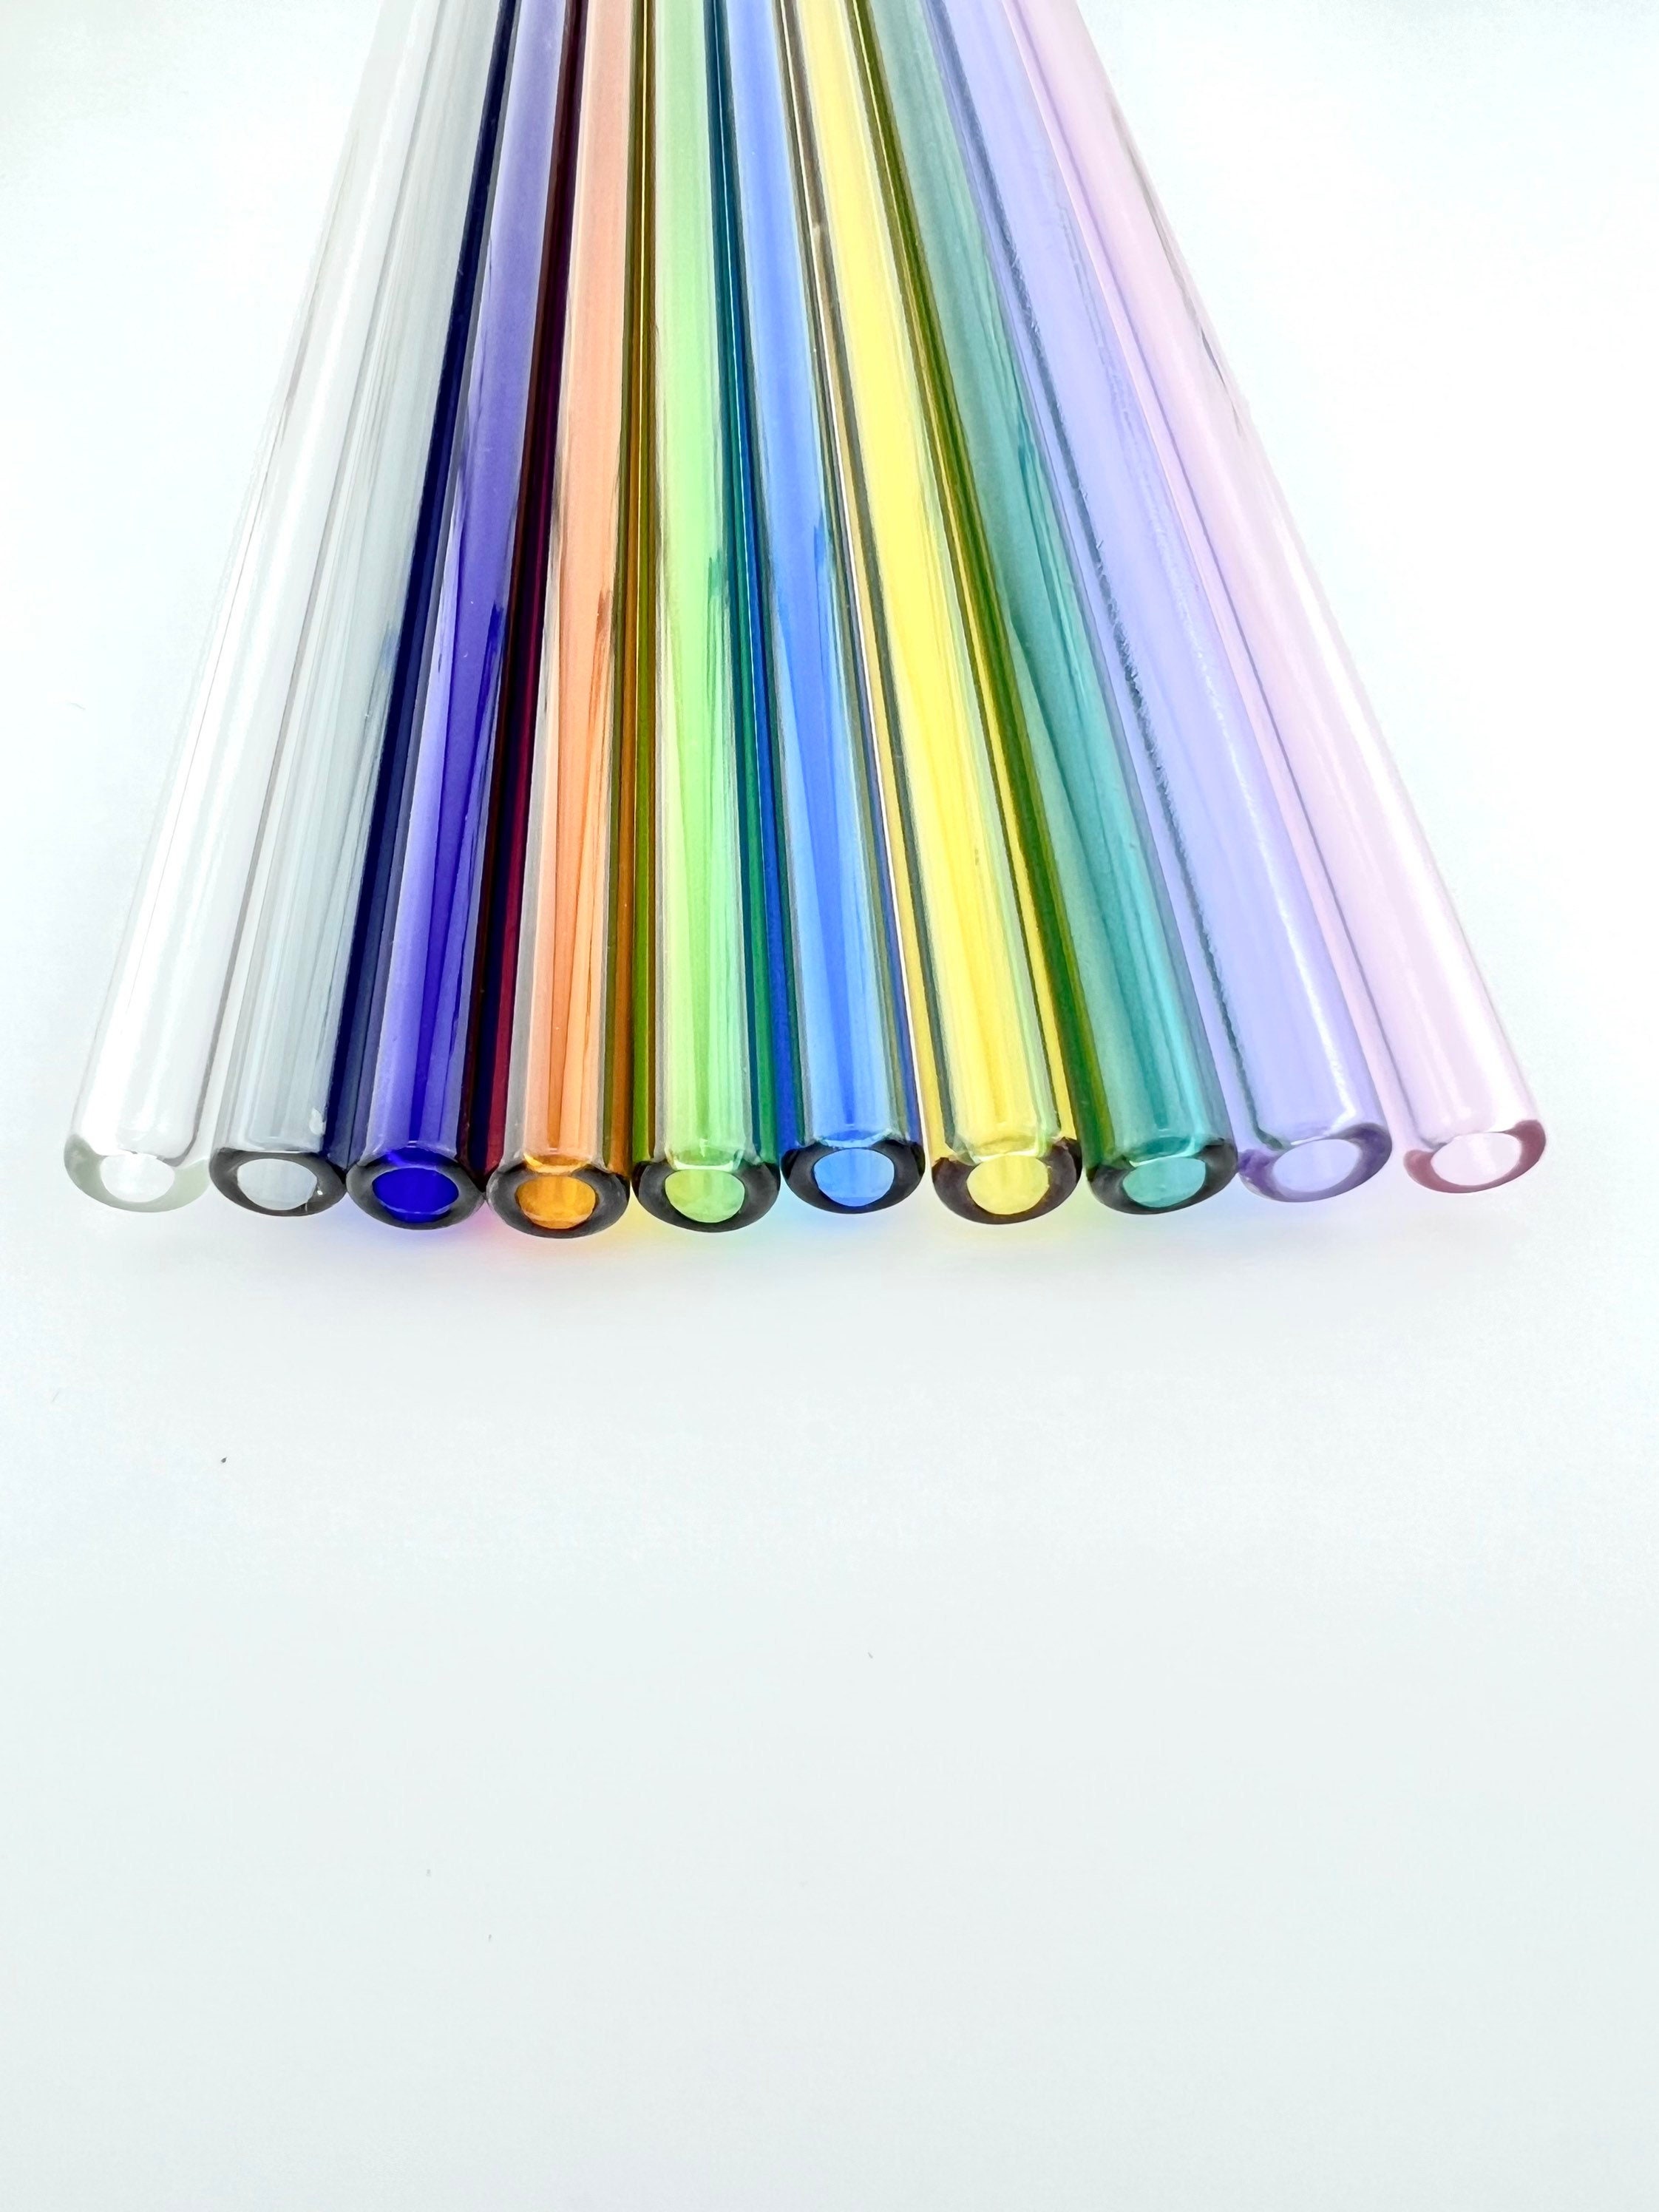 Stanley Size Glass Straw Replacement 12 inches - Drinking Straws.Glass